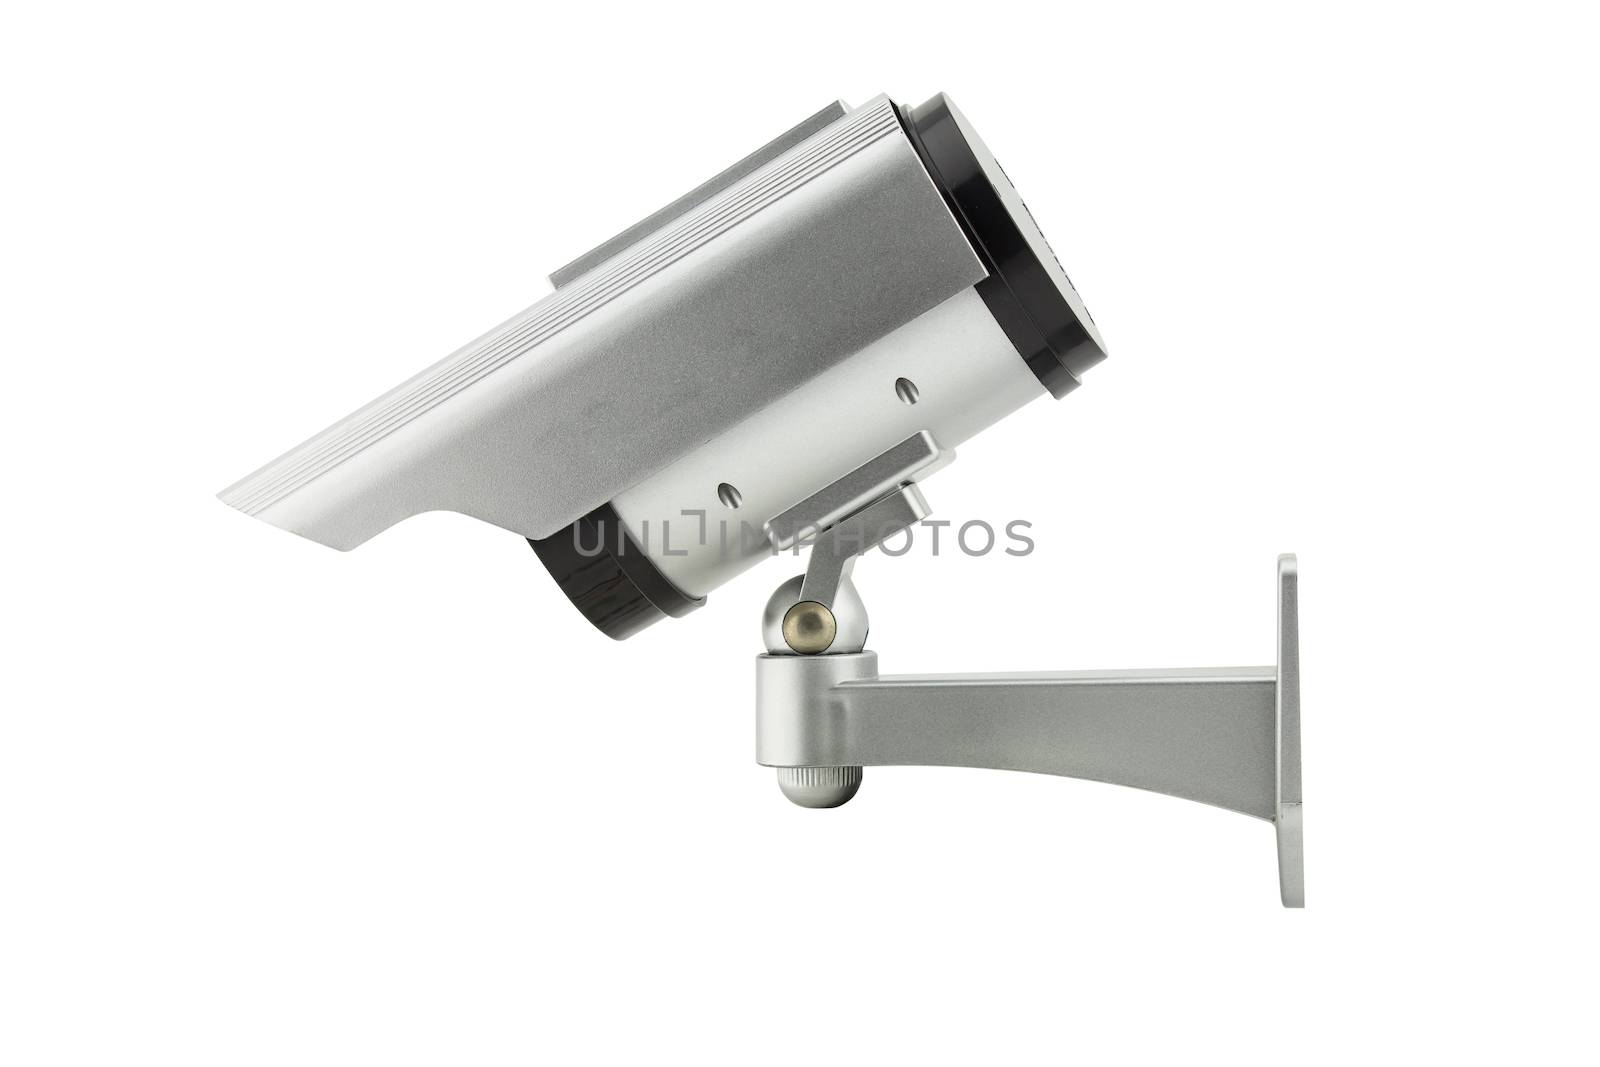 cctv(closed circuit television) camera isolated on white background